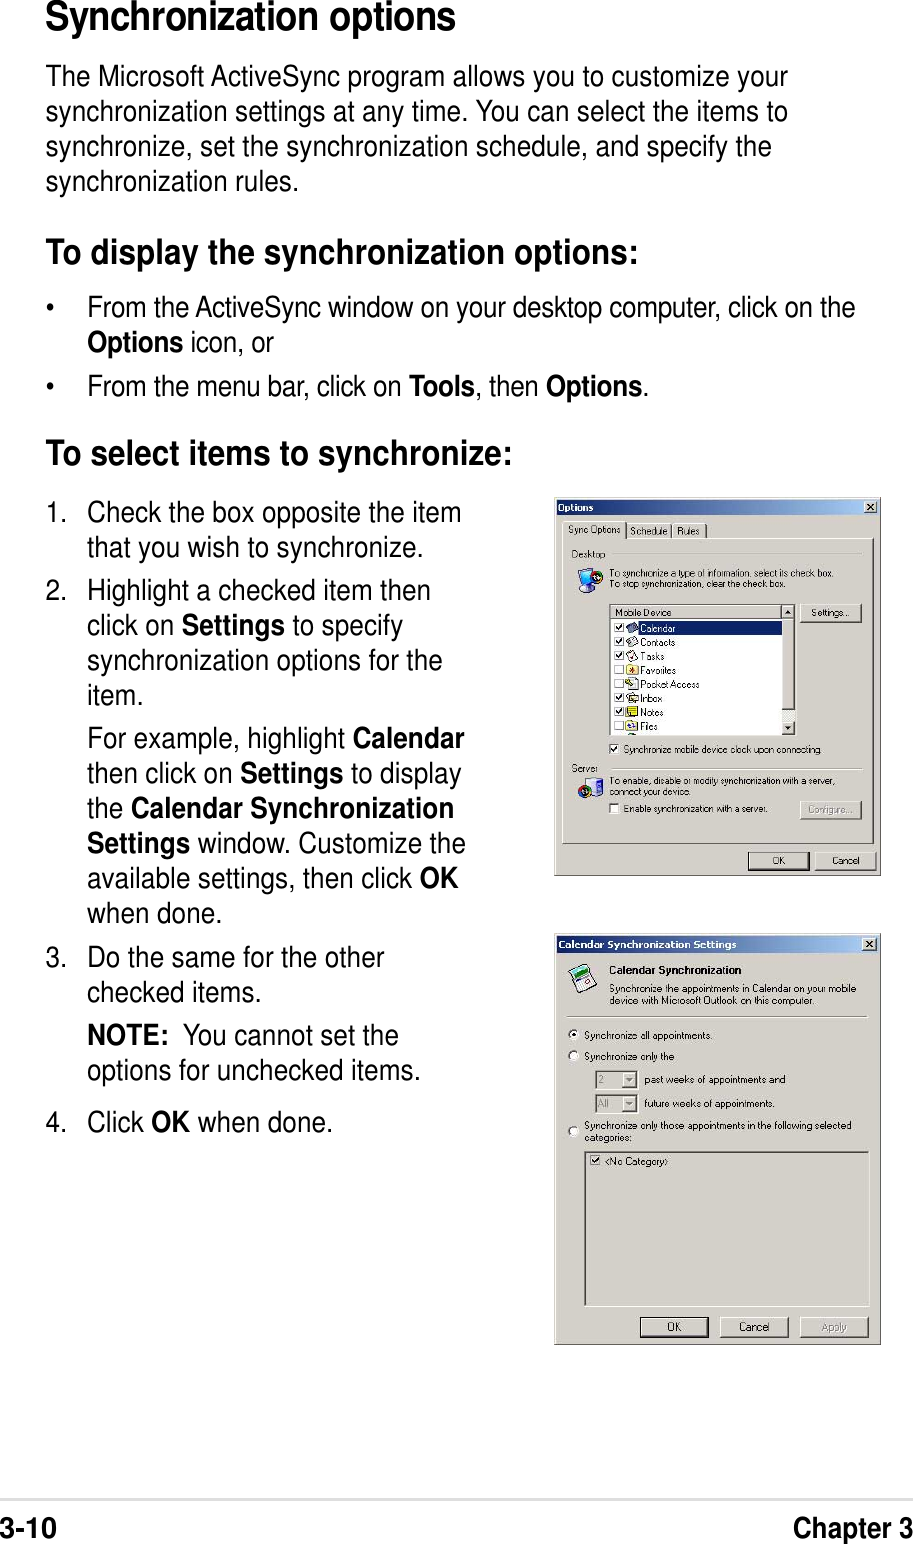 3-10Chapter 3Synchronization optionsThe Microsoft ActiveSync program allows you to customize yoursynchronization settings at any time. You can select the items tosynchronize, set the synchronization schedule, and specify thesynchronization rules.To display the synchronization options:•From the ActiveSync window on your desktop computer, click on theOptions icon, or•From the menu bar, click on Tools, then Options.1. Check the box opposite the itemthat you wish to synchronize.2. Highlight a checked item thenclick on Settings to specifysynchronization options for theitem.For example, highlight Calendarthen click on Settings to displaythe Calendar SynchronizationSettings window. Customize theavailable settings, then click OKwhen done.3. Do the same for the otherchecked items.NOTE:  You cannot set theoptions for unchecked items.4. Click OK when done.To select items to synchronize: